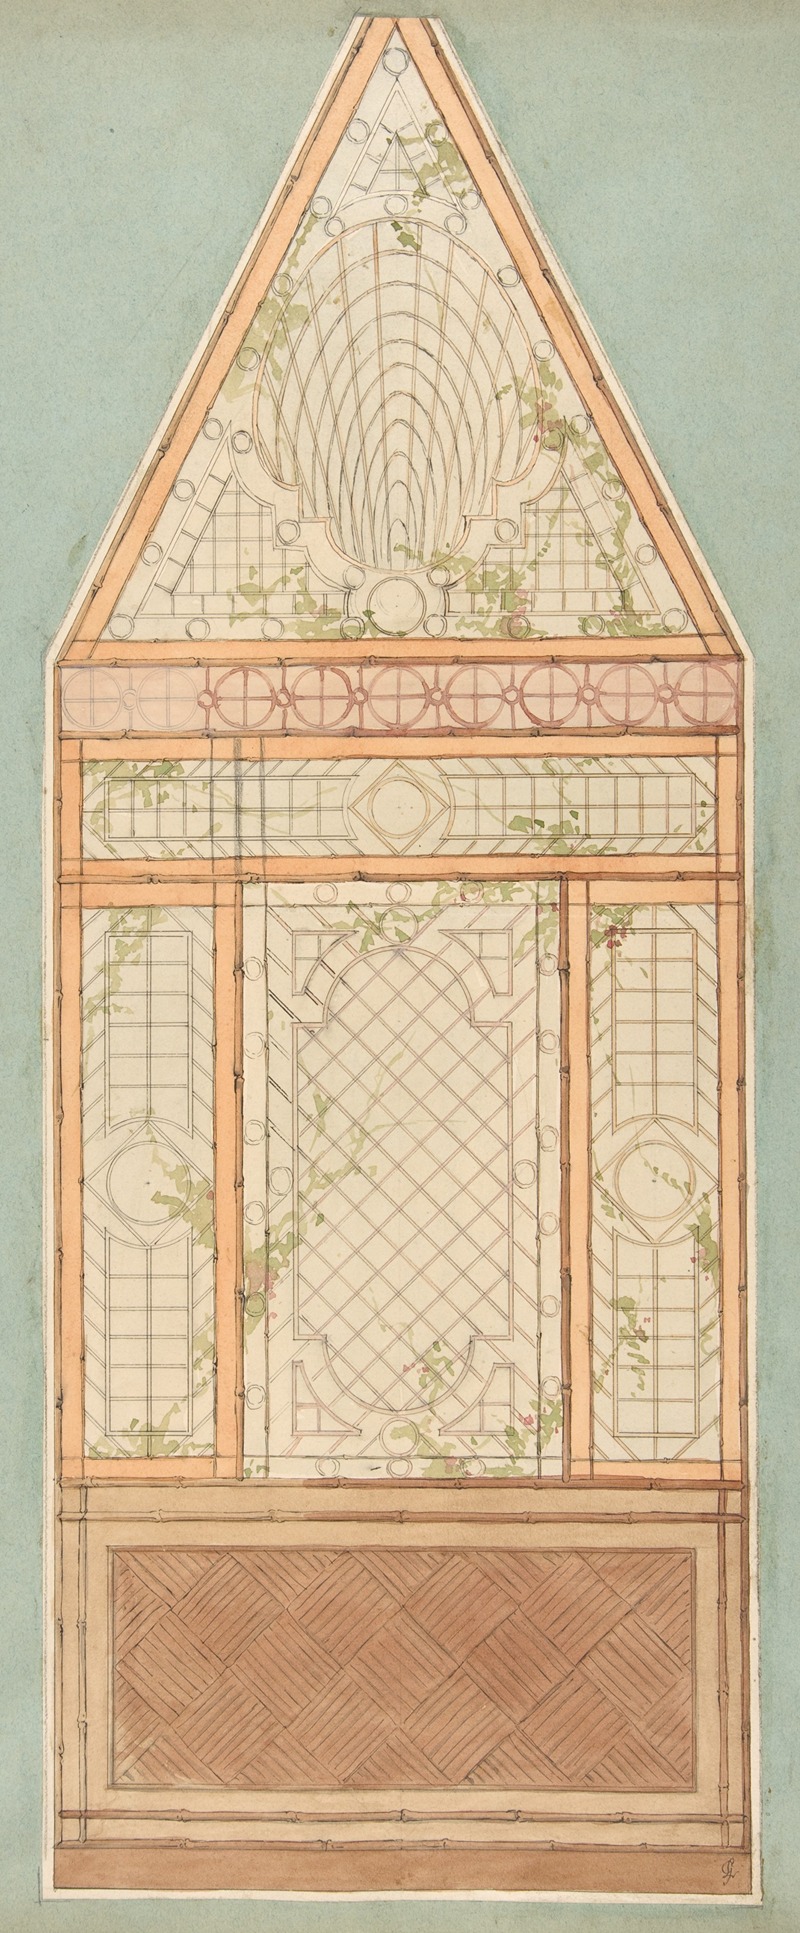 Jules-Edmond-Charles Lachaise - Design for the treatment of a wall with a pattern of lattices, vines, and bamboo